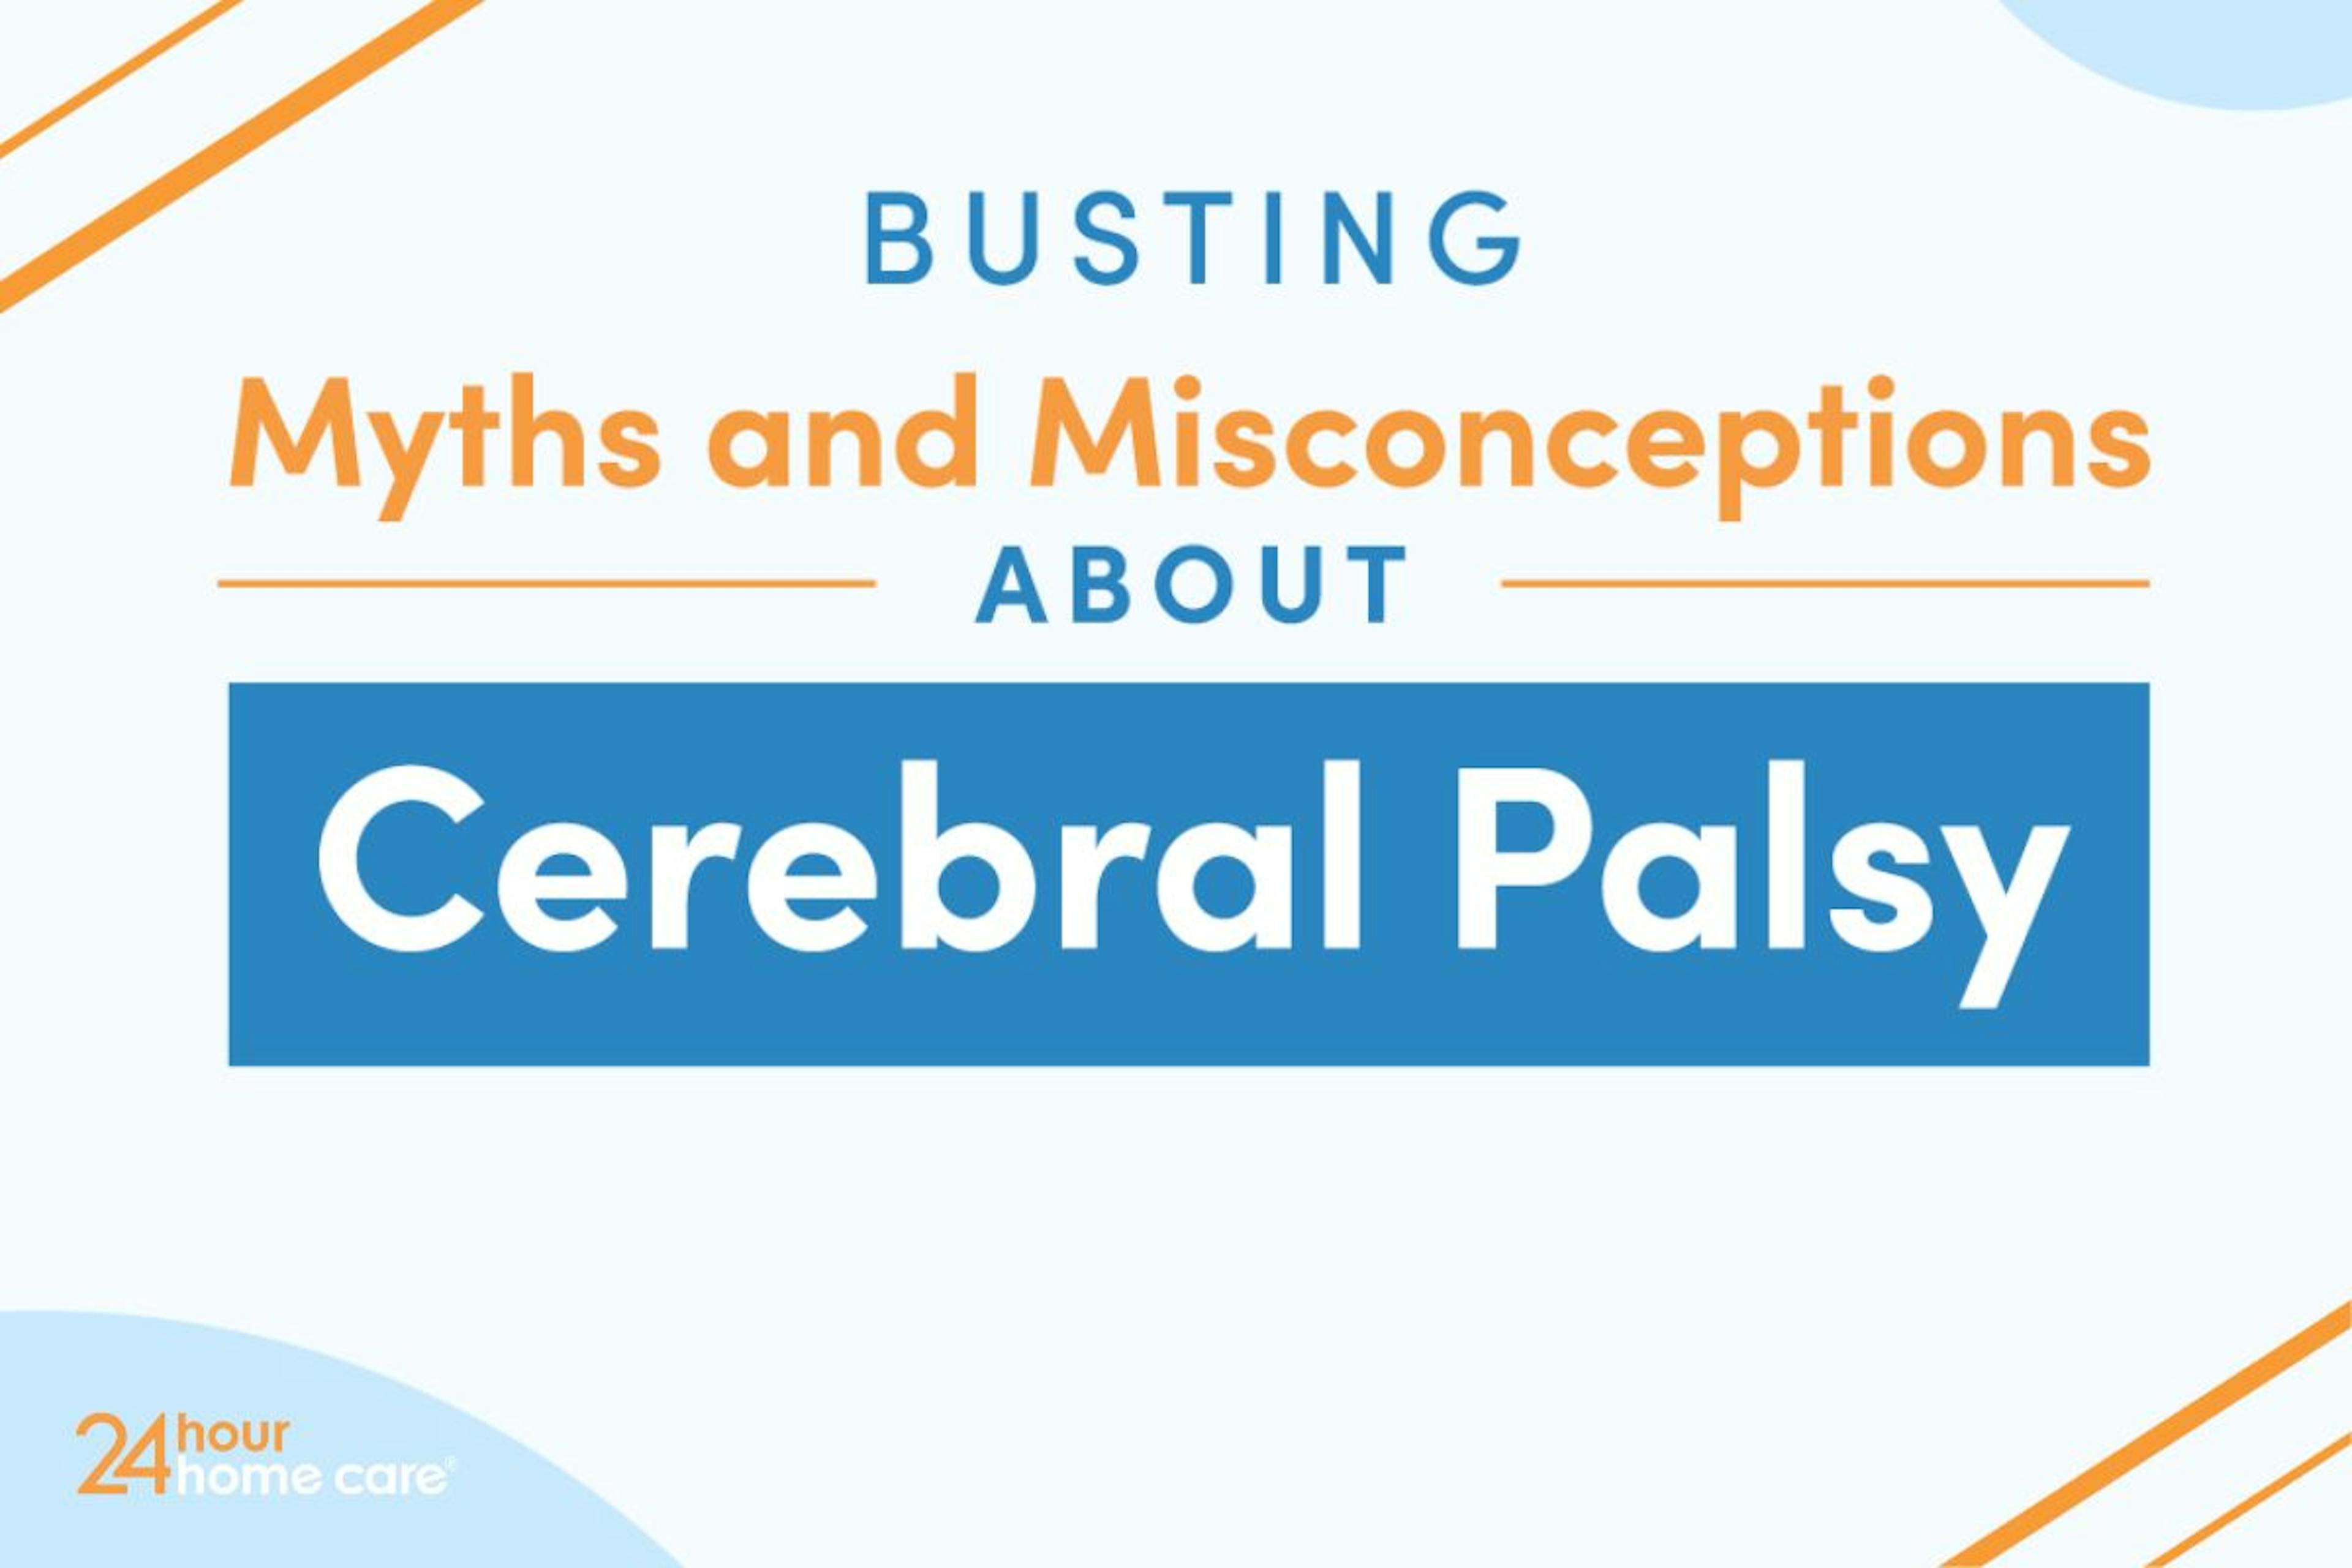 Illustrated image with the words, "Busting Myths and Misconceptions about Cerebral Palsy"